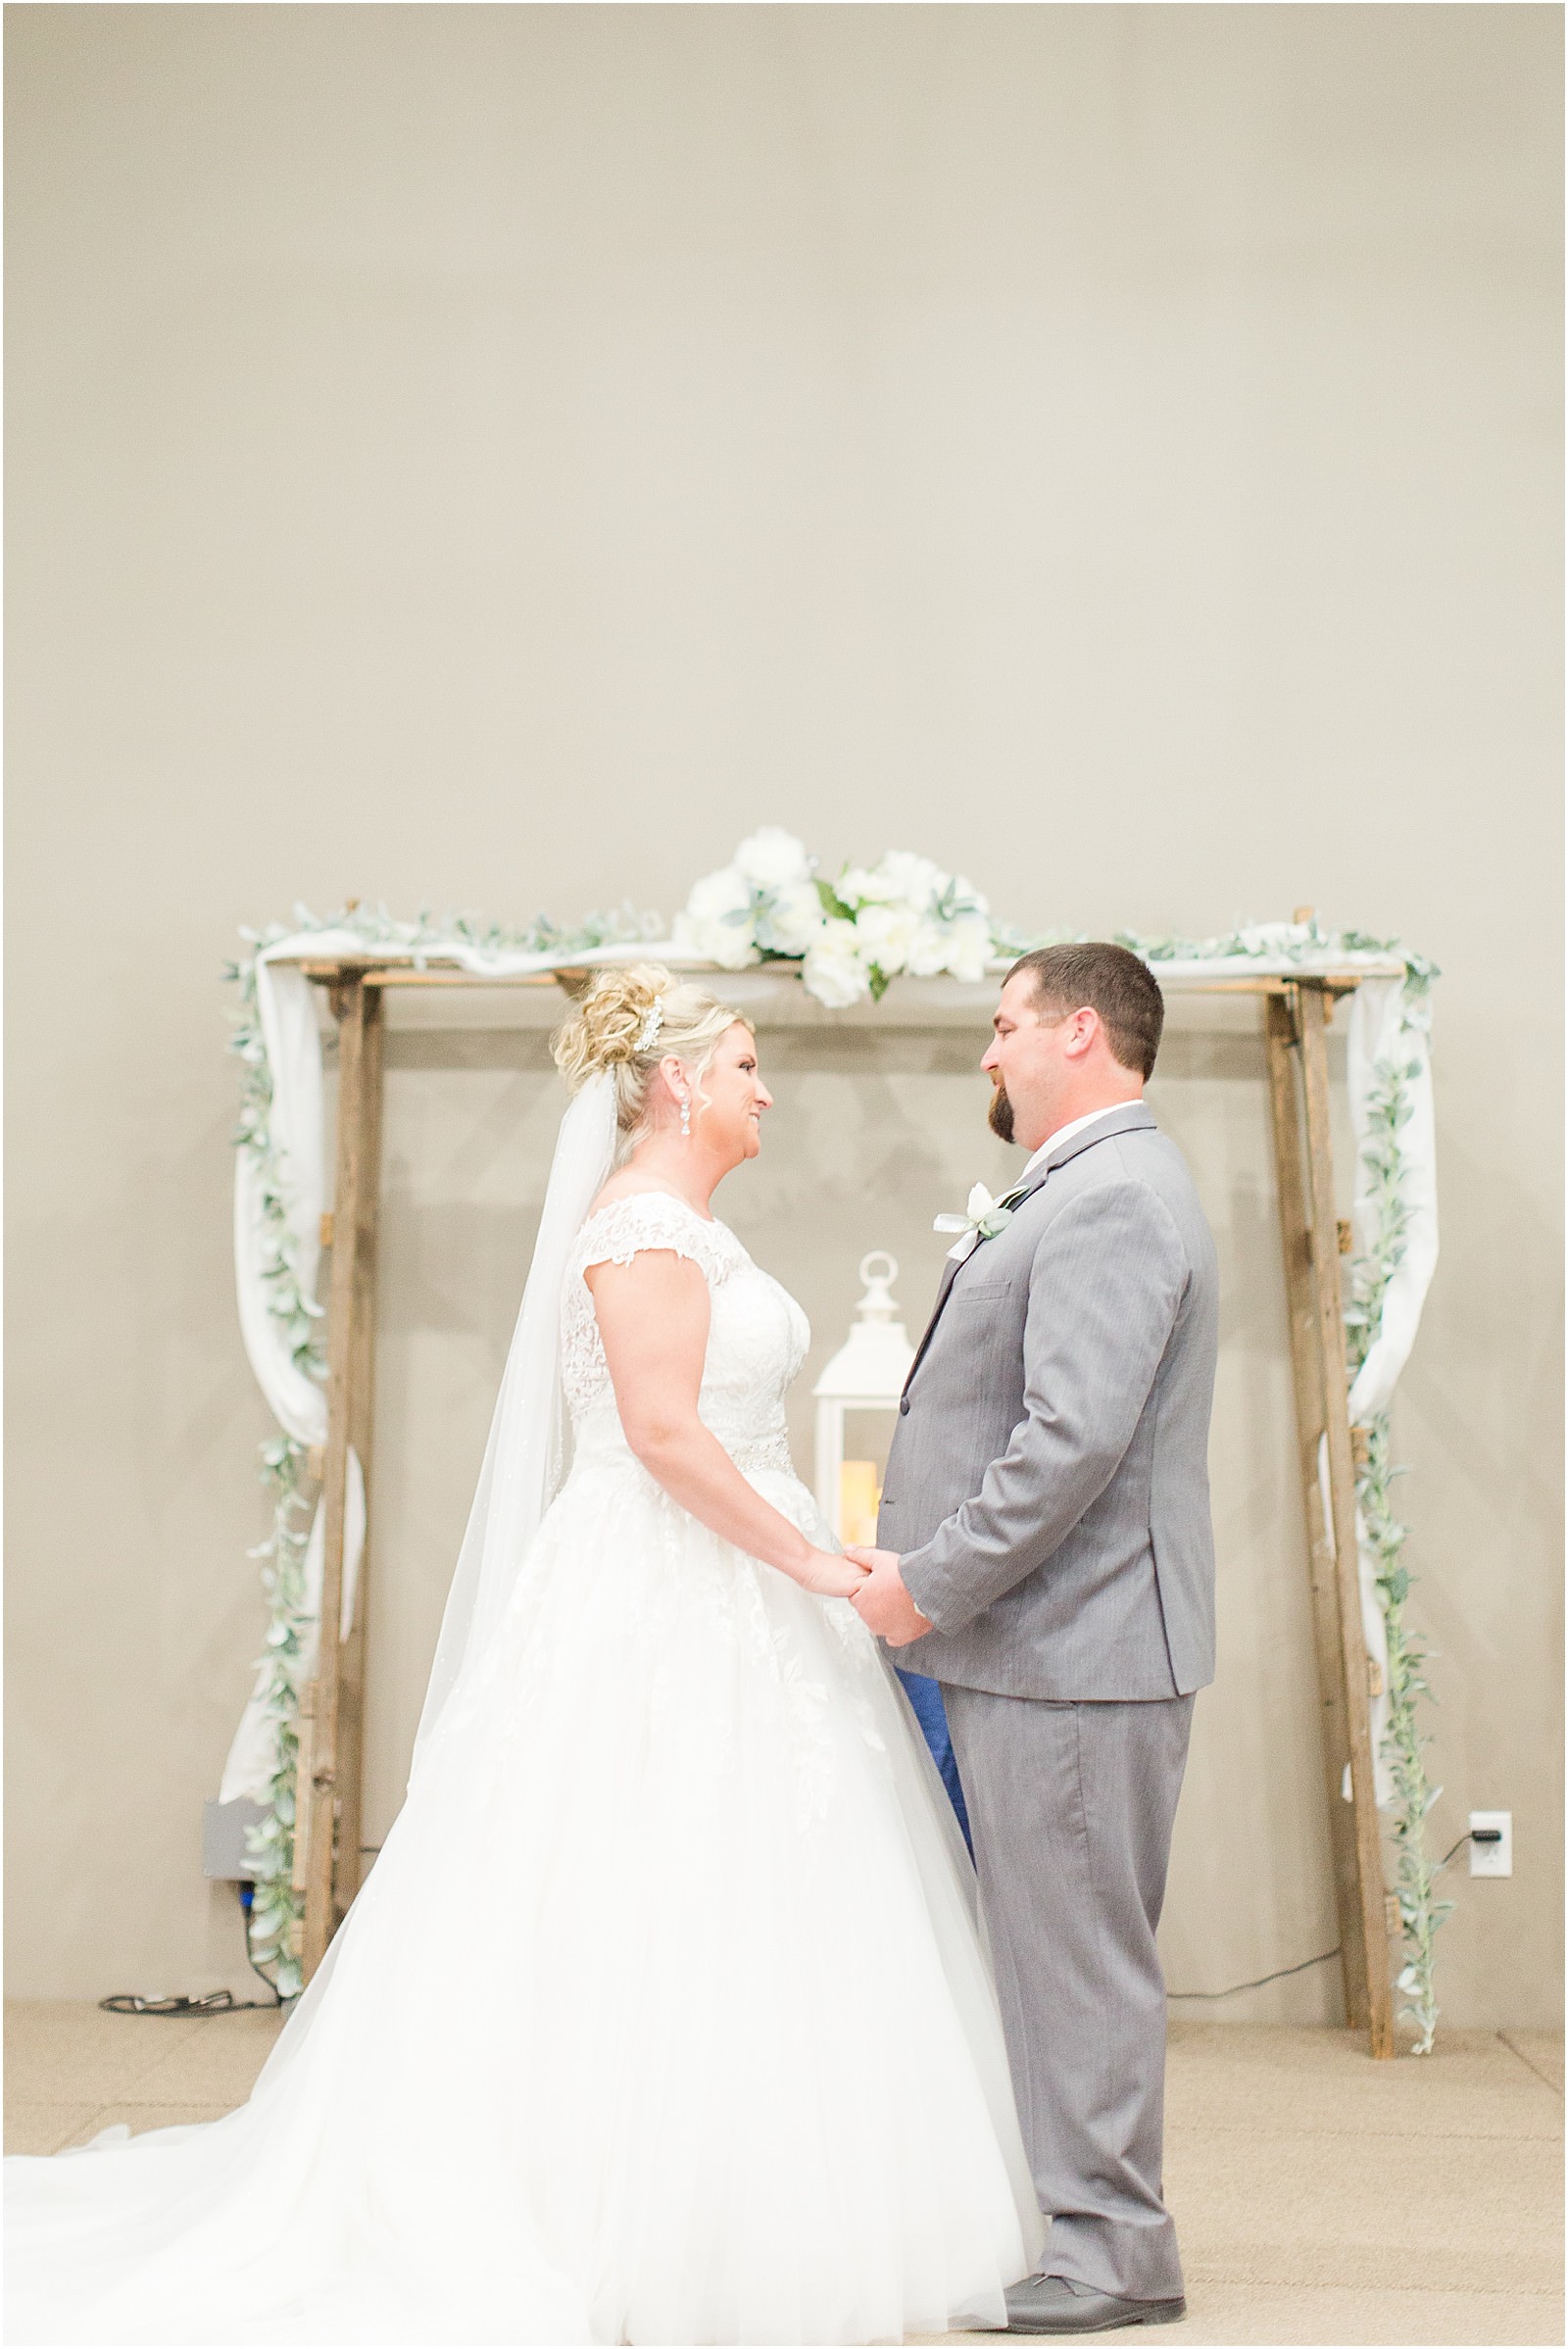 A Navy and Blush Wedding in Tell City Indiana | Brianna and Matt | Bret and Brandie Photography 0130.jpg